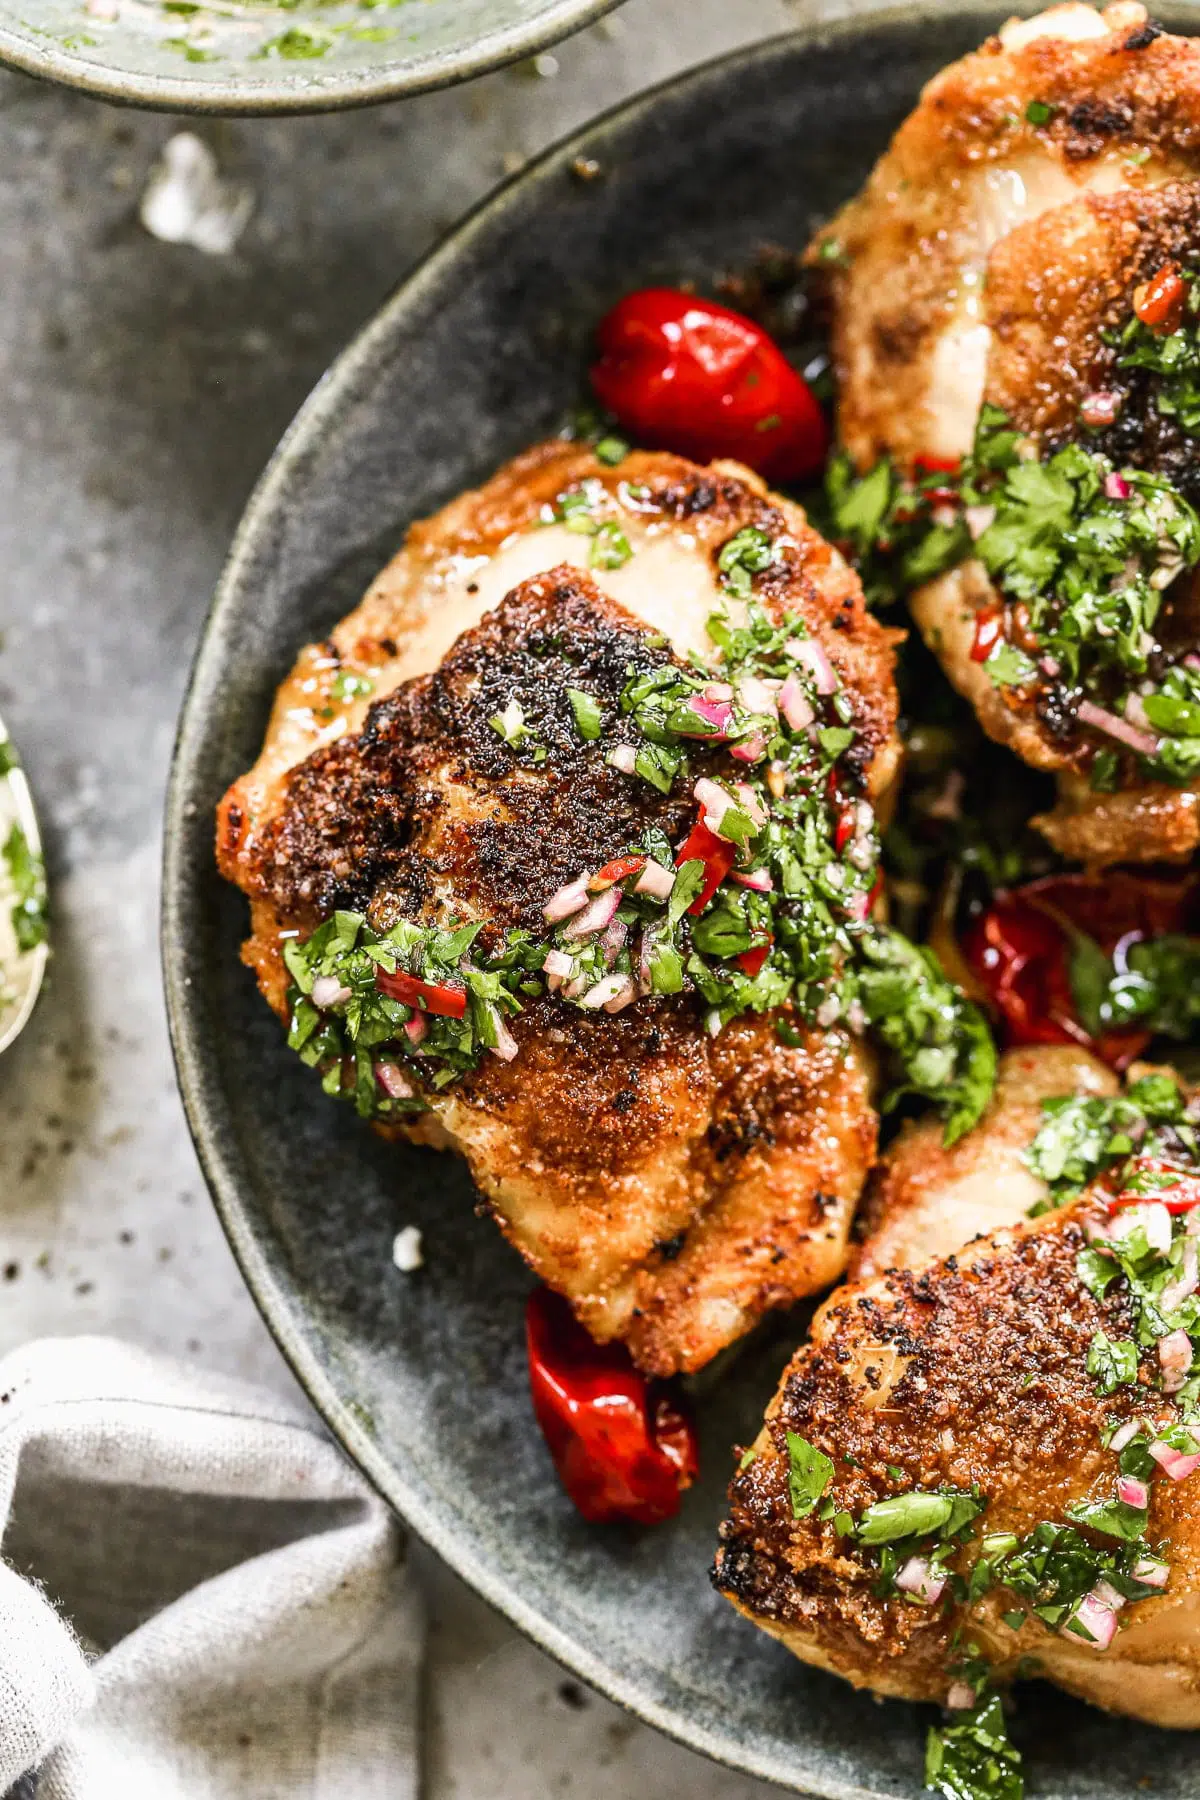 Air Fryer Chicken Thighs are a true winner in the realm of delicious, easy chicken dinners. We dust bone-in, skin-on chicken thighs with garlic, onion, and cumin then cook them inn the air fryer until the skin is irresistibly crispy and the inside is tender and moist. We drizzle it all with a fiiery chimichurri and dig in! 